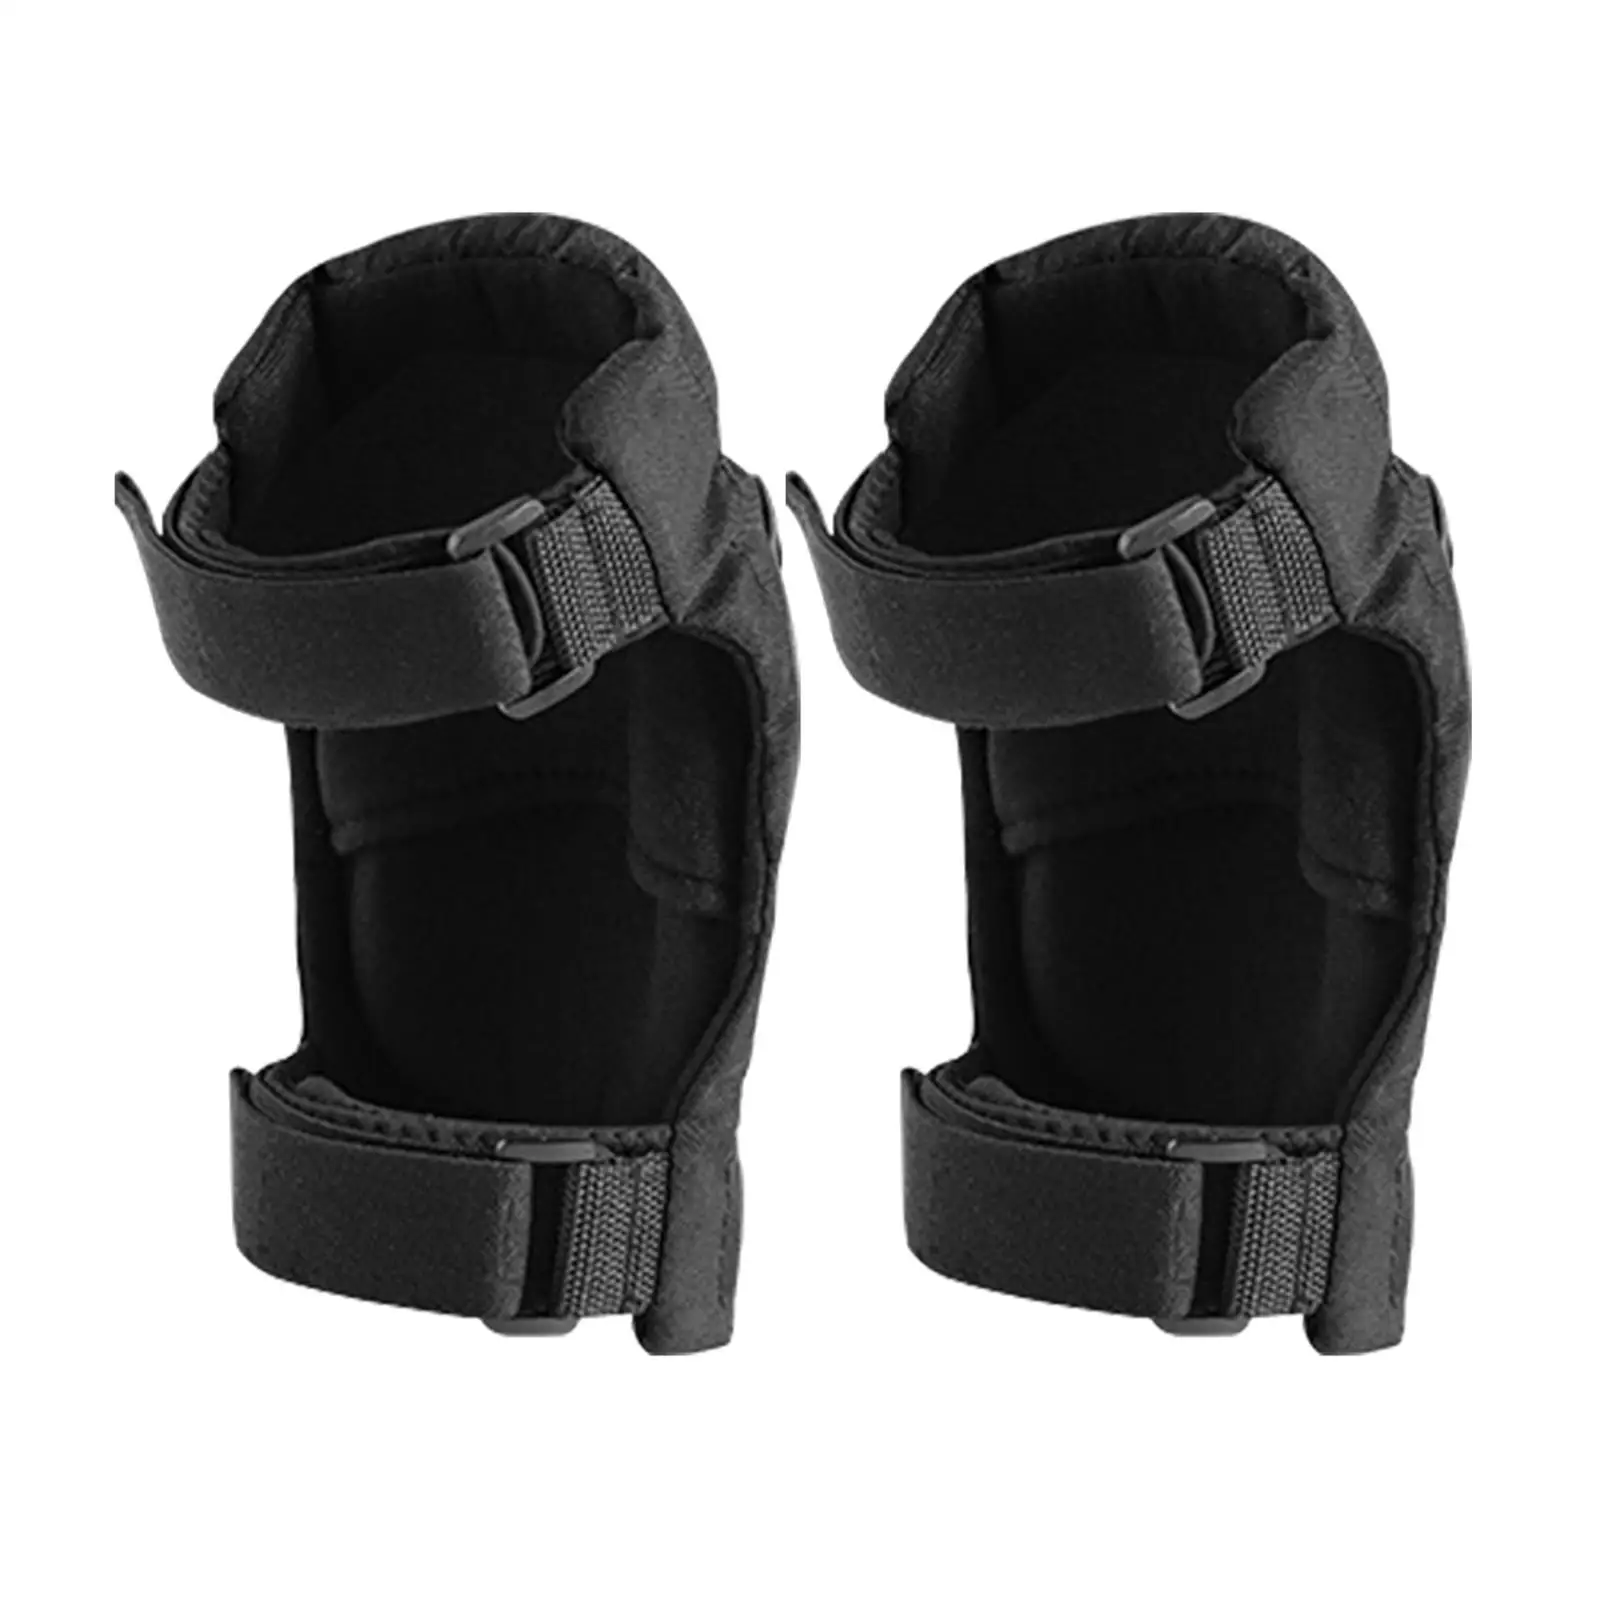 Motocross Knee Guard Protector Breathable Elbow Pads for Balance Bike